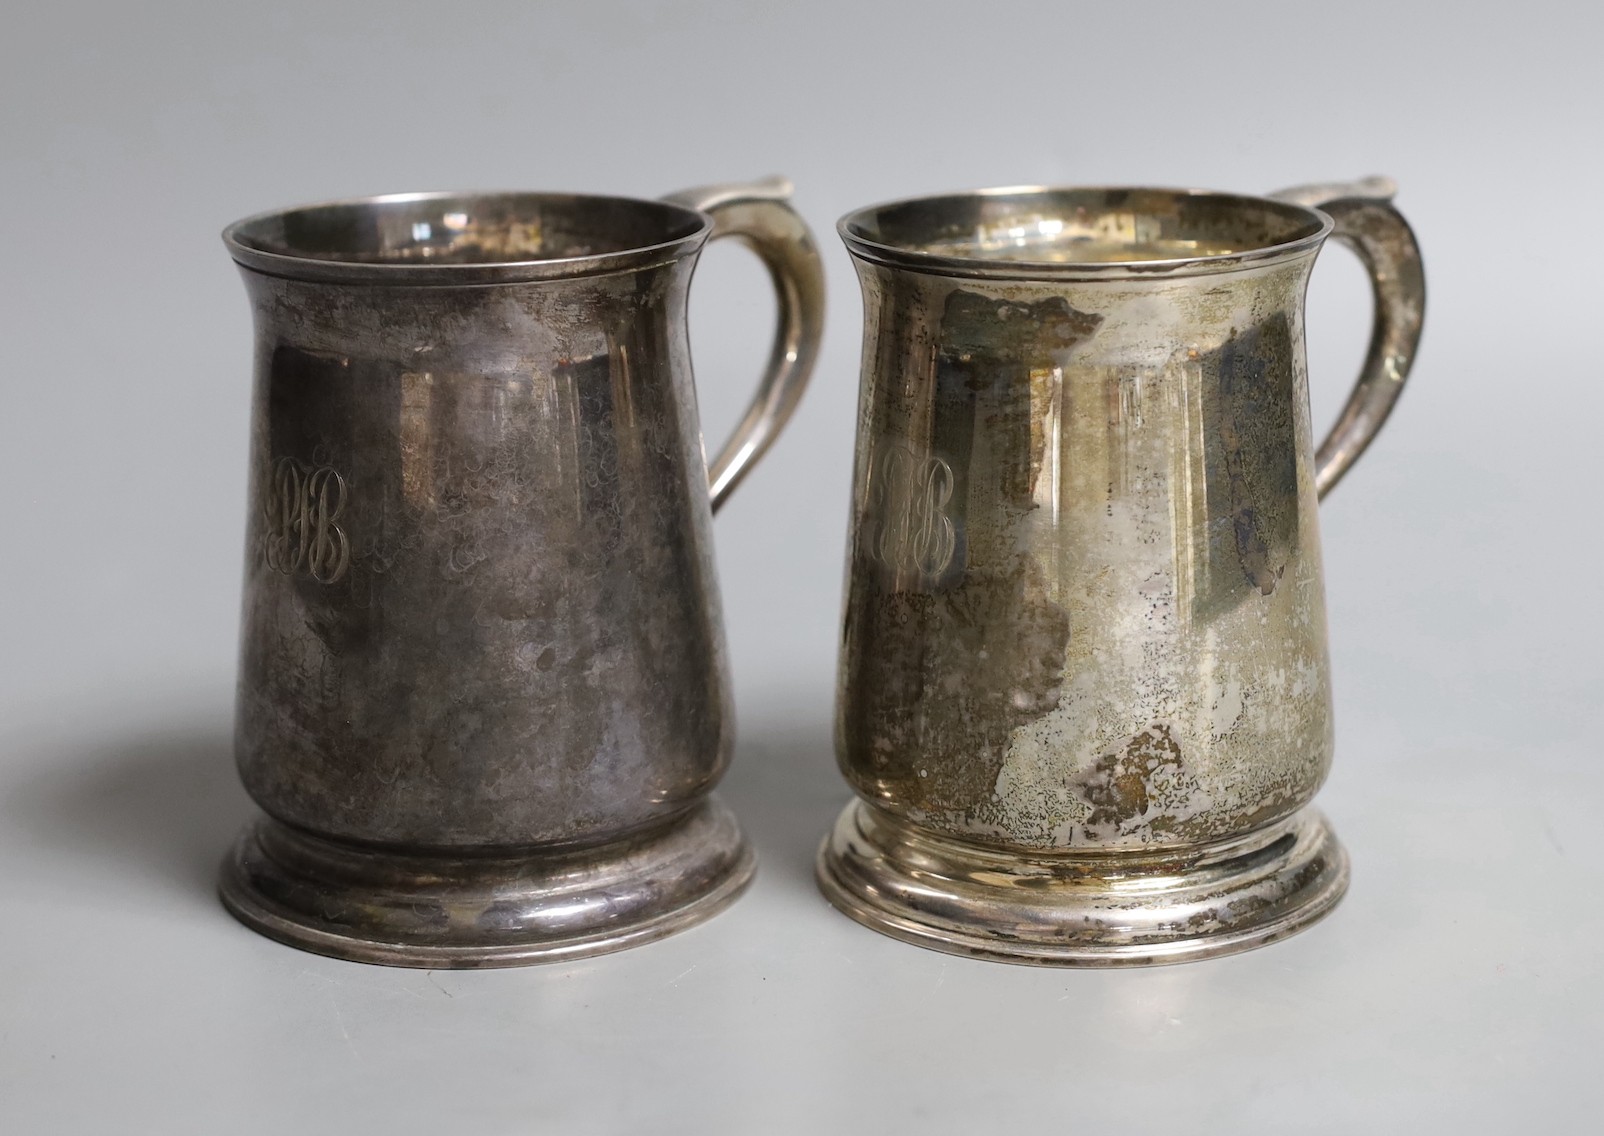 A pair 1970's silver mugs with S-scroll handles, by Asprey & Co Ltd, London, 1973, height 10.8cm, 18.5oz, both with engraved monograms